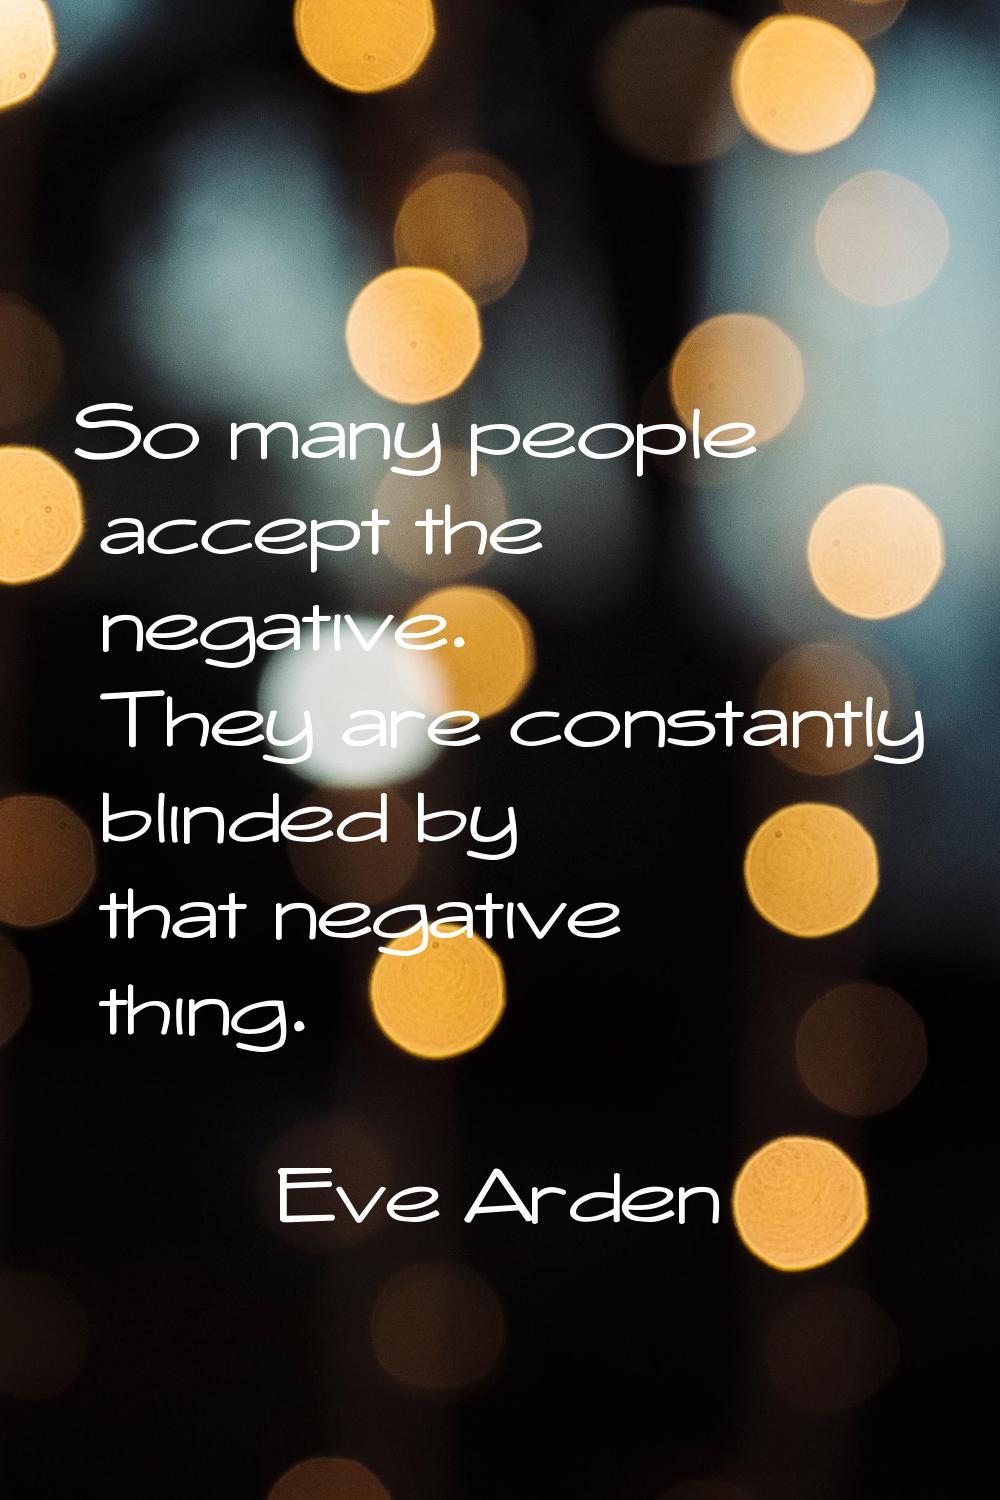 So many people accept the negative. They are constantly blinded by that negative thing.